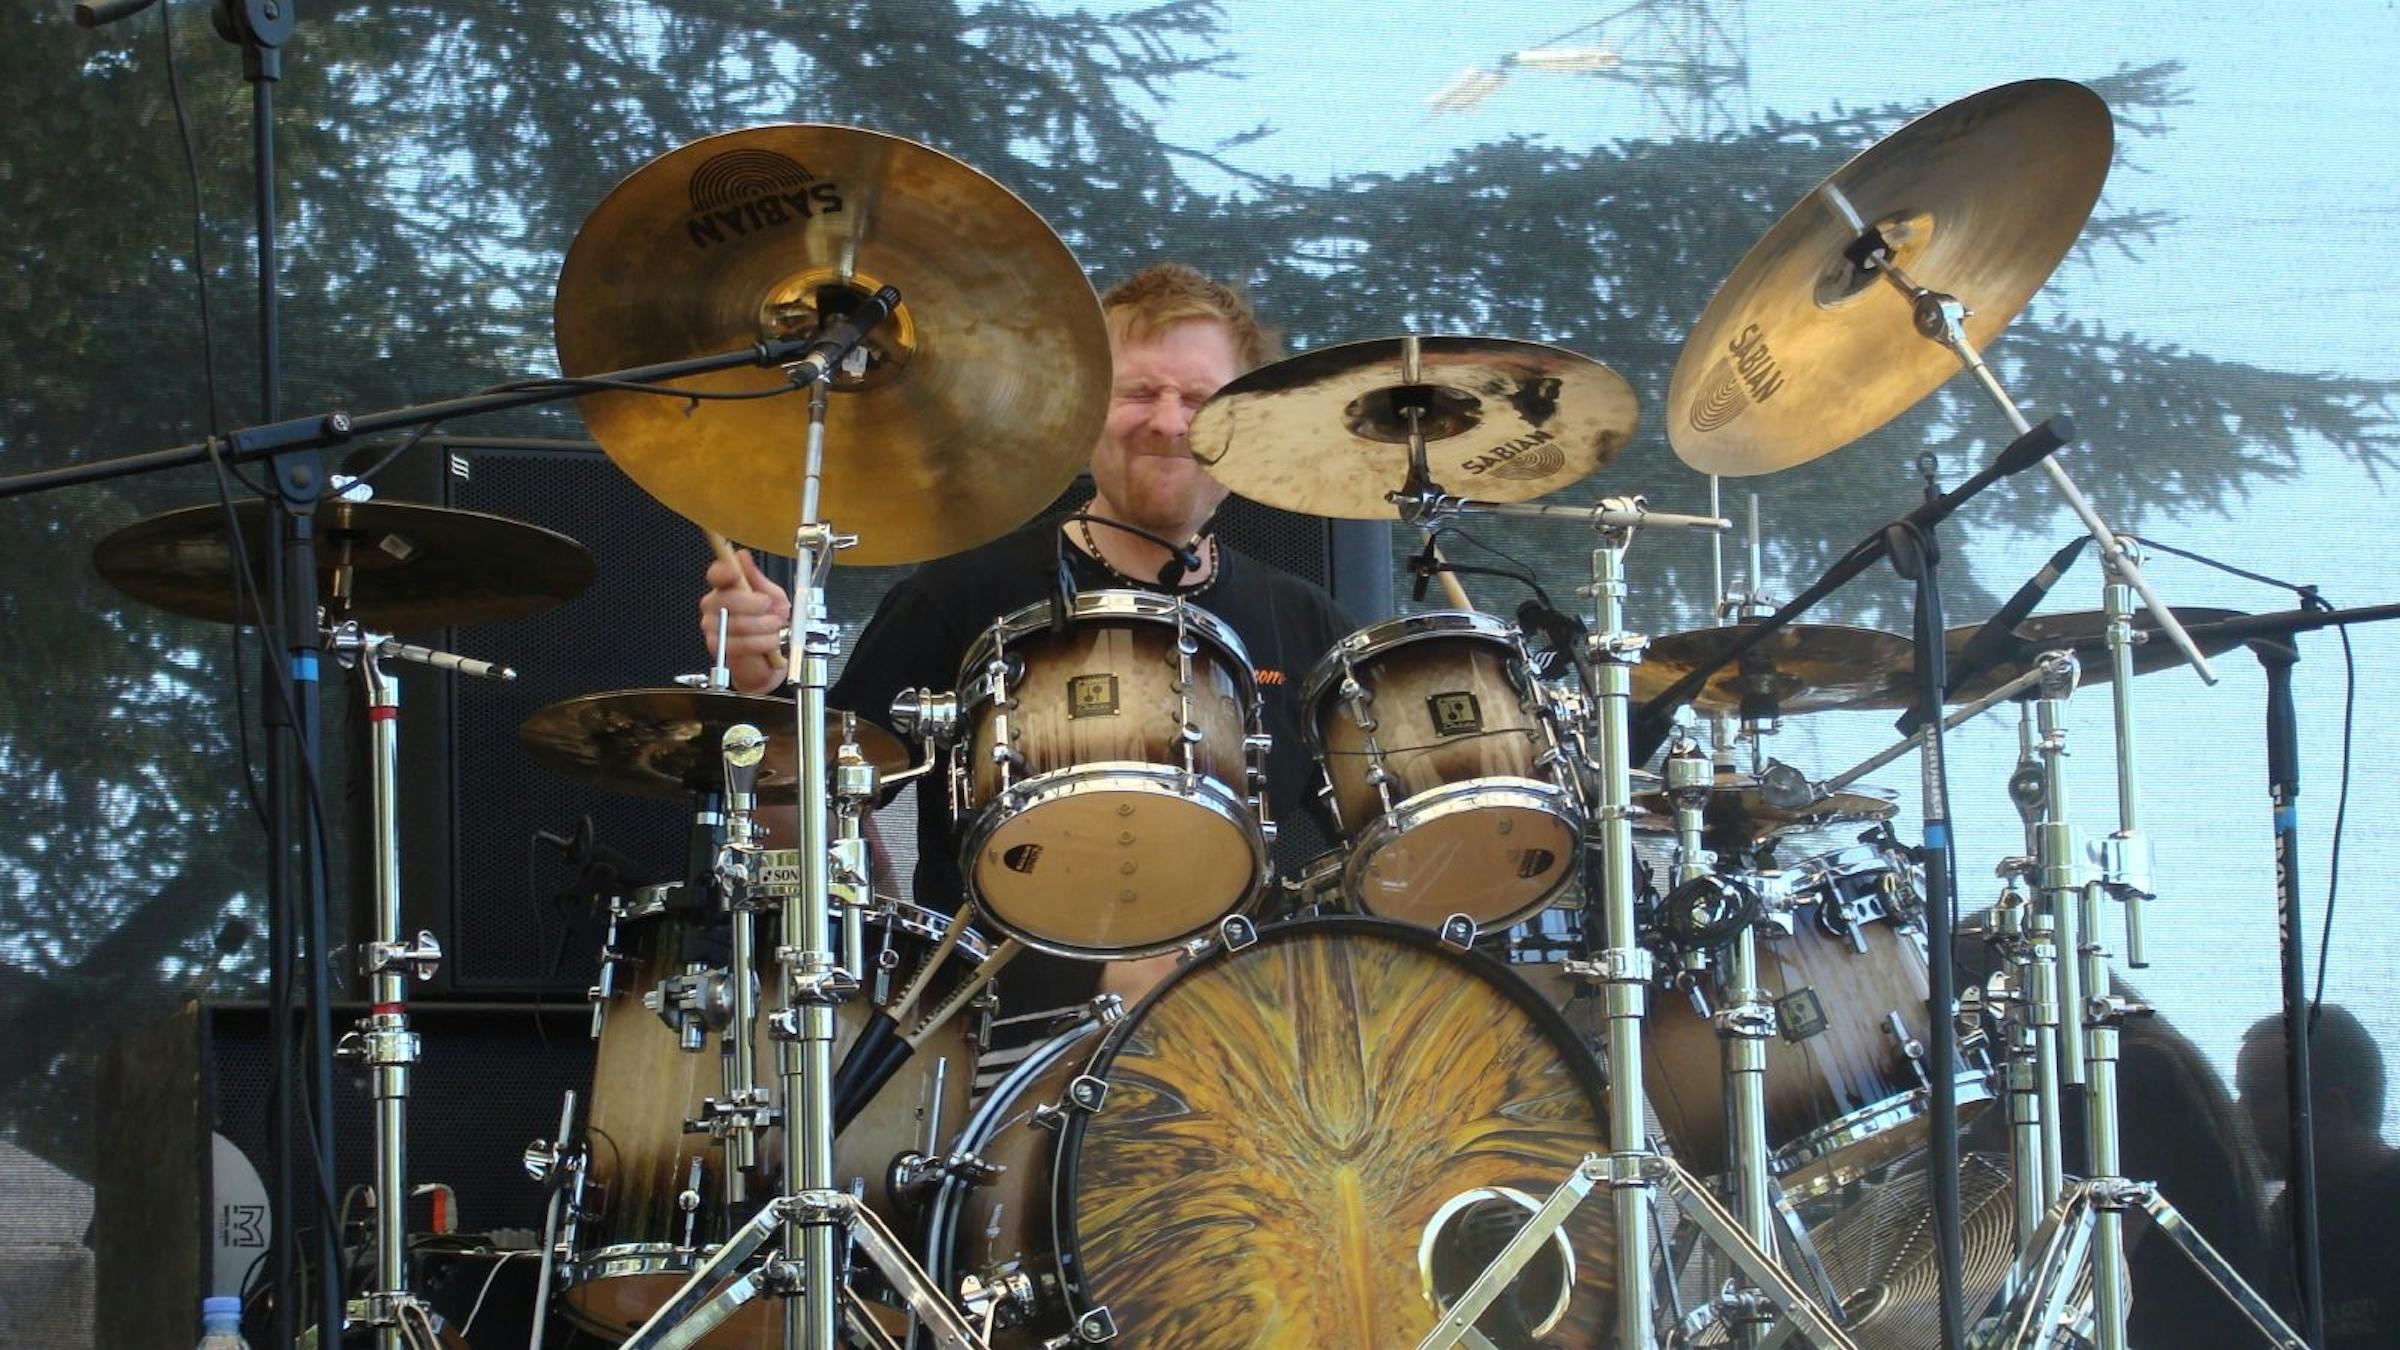 Late Cynic Drummer Sean Reinert Wasn’t Allowed to Donate His Organs Because He Was Gay